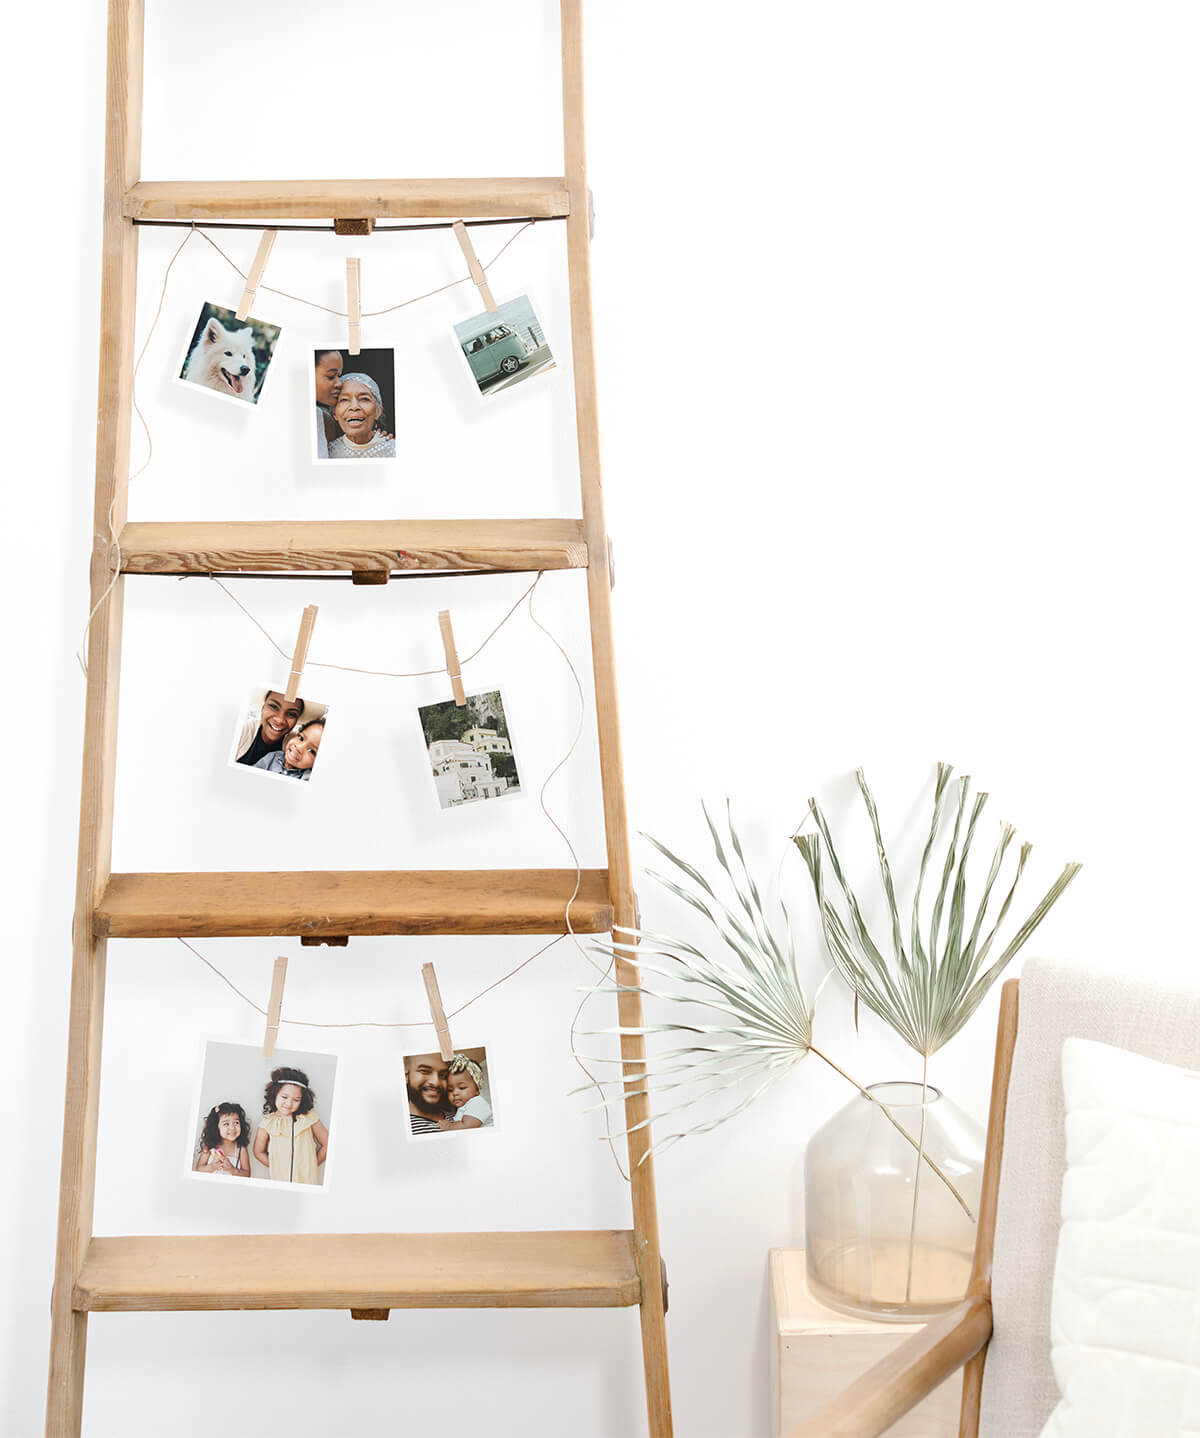 Photo prints hanging from rungs of wooden ladder